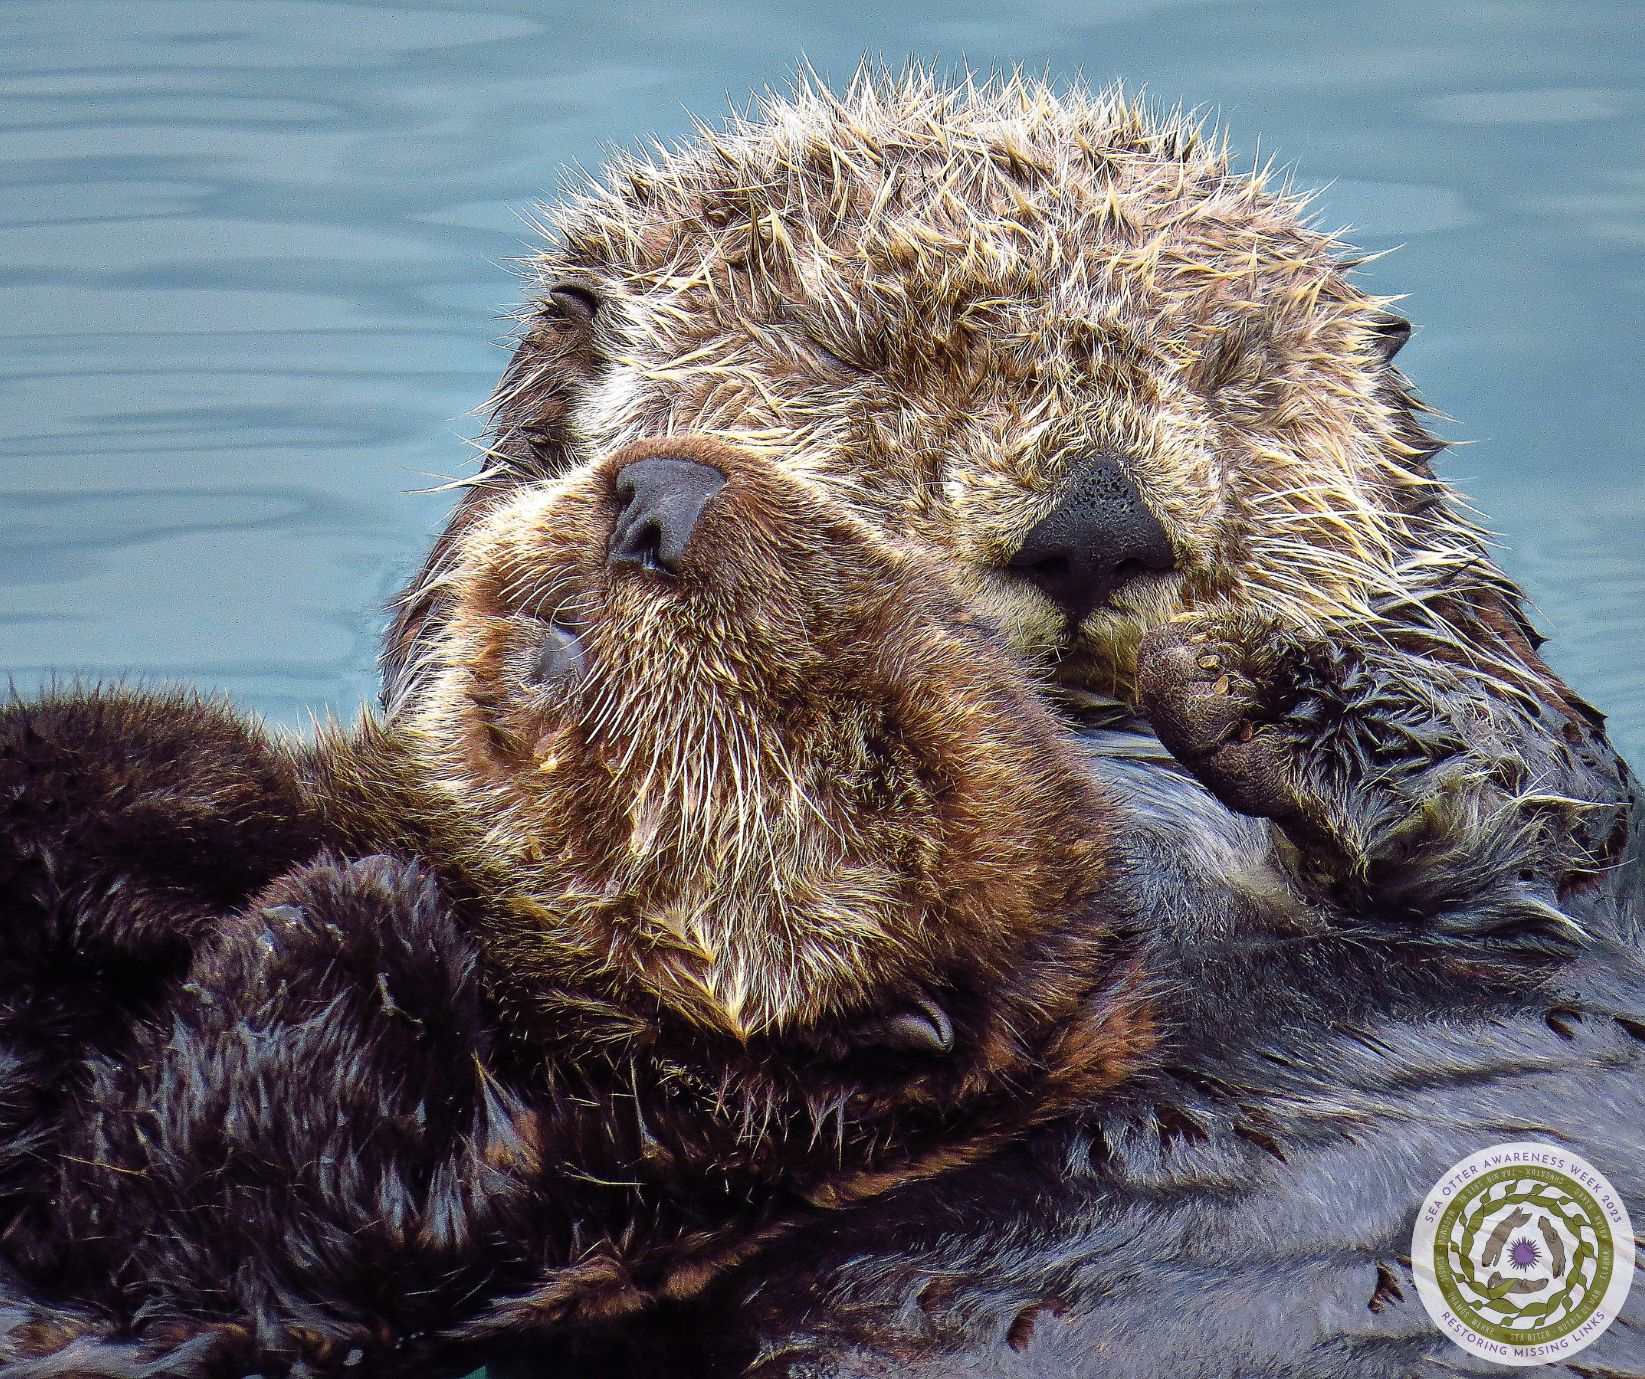 Sea otter pup and parent